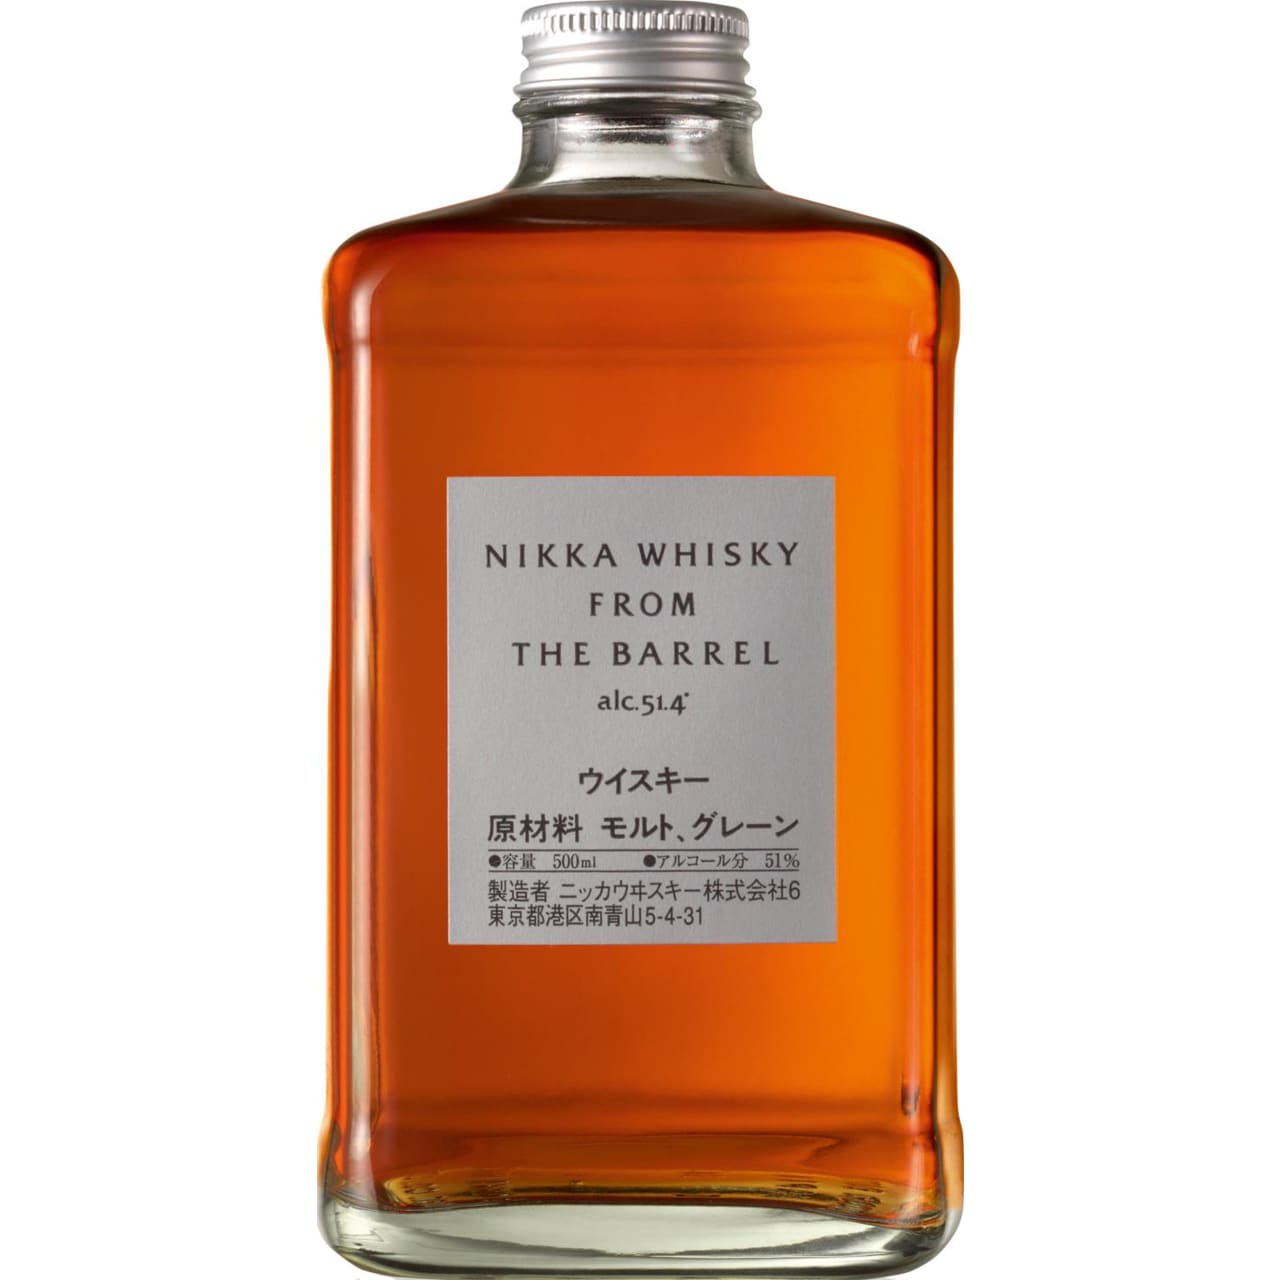 Nikka from the Barrel is big-boned and bursting with character.